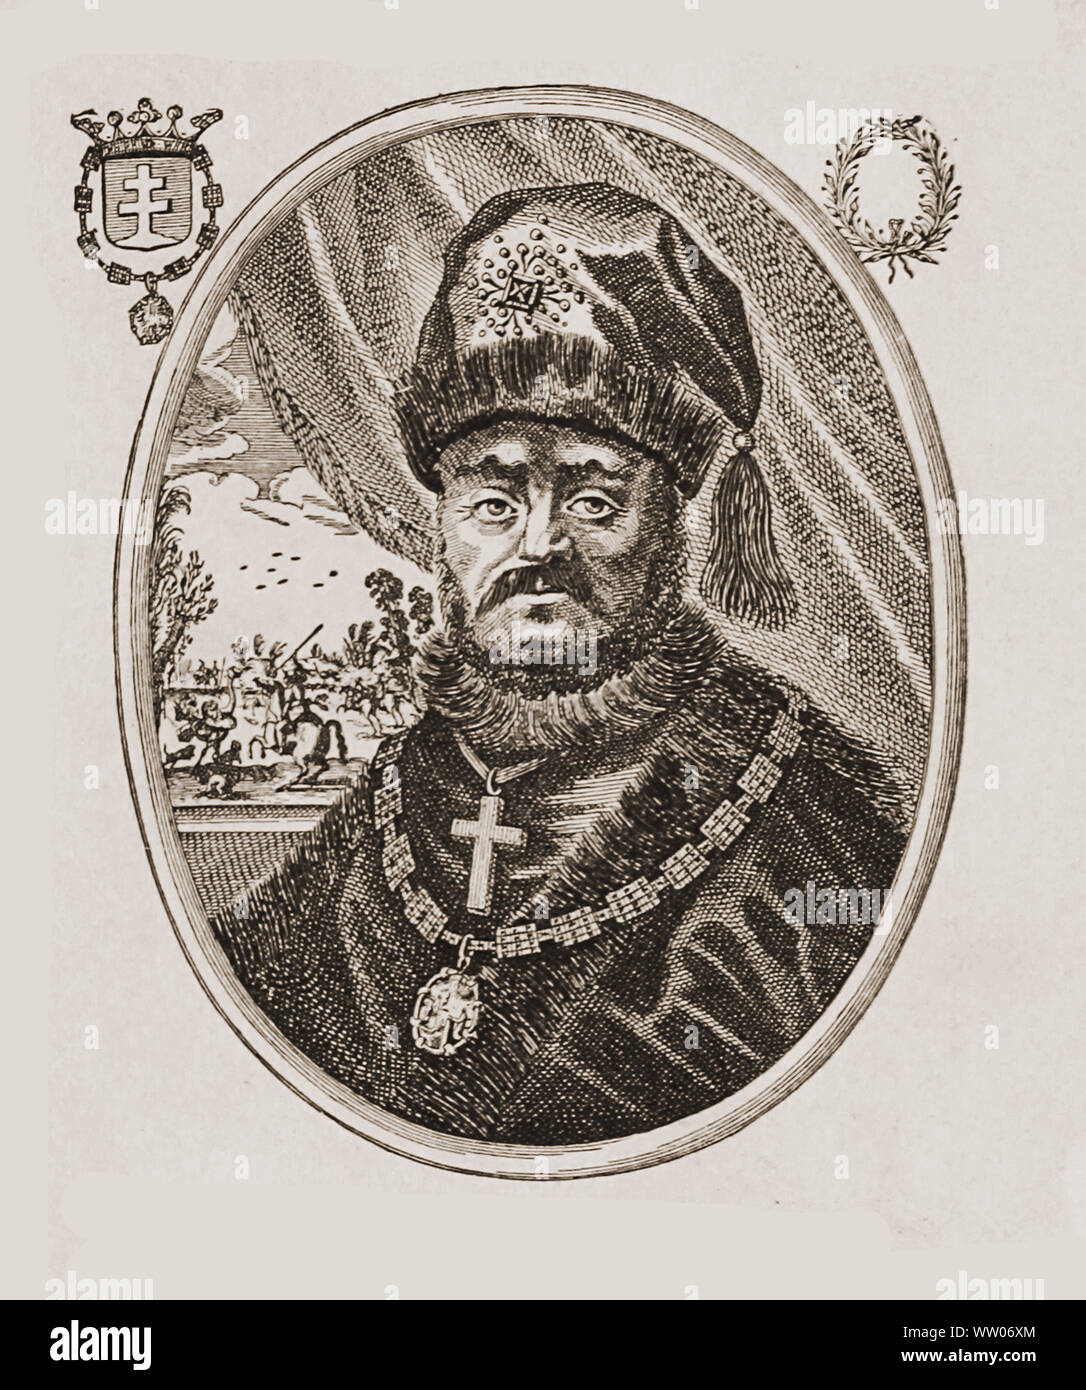 Mikhail Fyodorovich Romanov(1596 - 1645) or Michael I tsar of Russia founder of the Romanov dynasty. Conquering most of Siberia with the aid of the Cossaks, his reign extended Russia to the Pacific Ocean Stock Photo